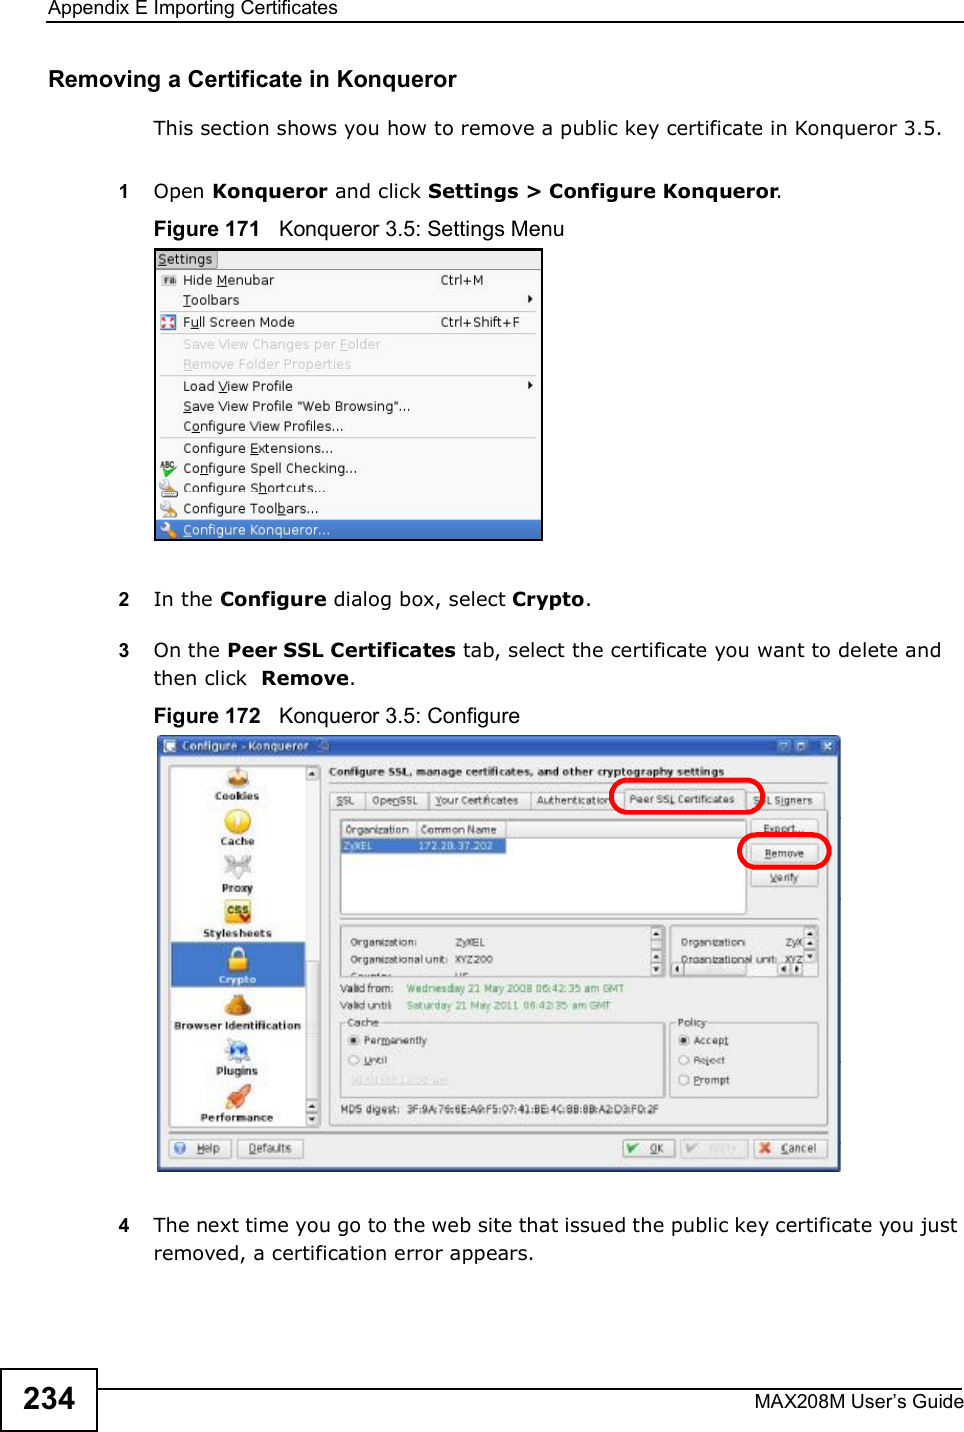 Appendix EImporting CertificatesMAX208M User s Guide234Removing a Certificate in KonquerorThis section shows you how to remove a public key certificate in Konqueror 3.5.1Open Konqueror and click Settings &gt; Configure Konqueror.Figure 171   Konqueror 3.5: Settings Menu2In the Configure dialog box, select Crypto. 3On the Peer SSL Certificates tab, select the certificate you want to delete and then click  Remove.Figure 172   Konqueror 3.5: Configure4The next time you go to the web site that issued the public key certificate you just removed, a certification error appears.